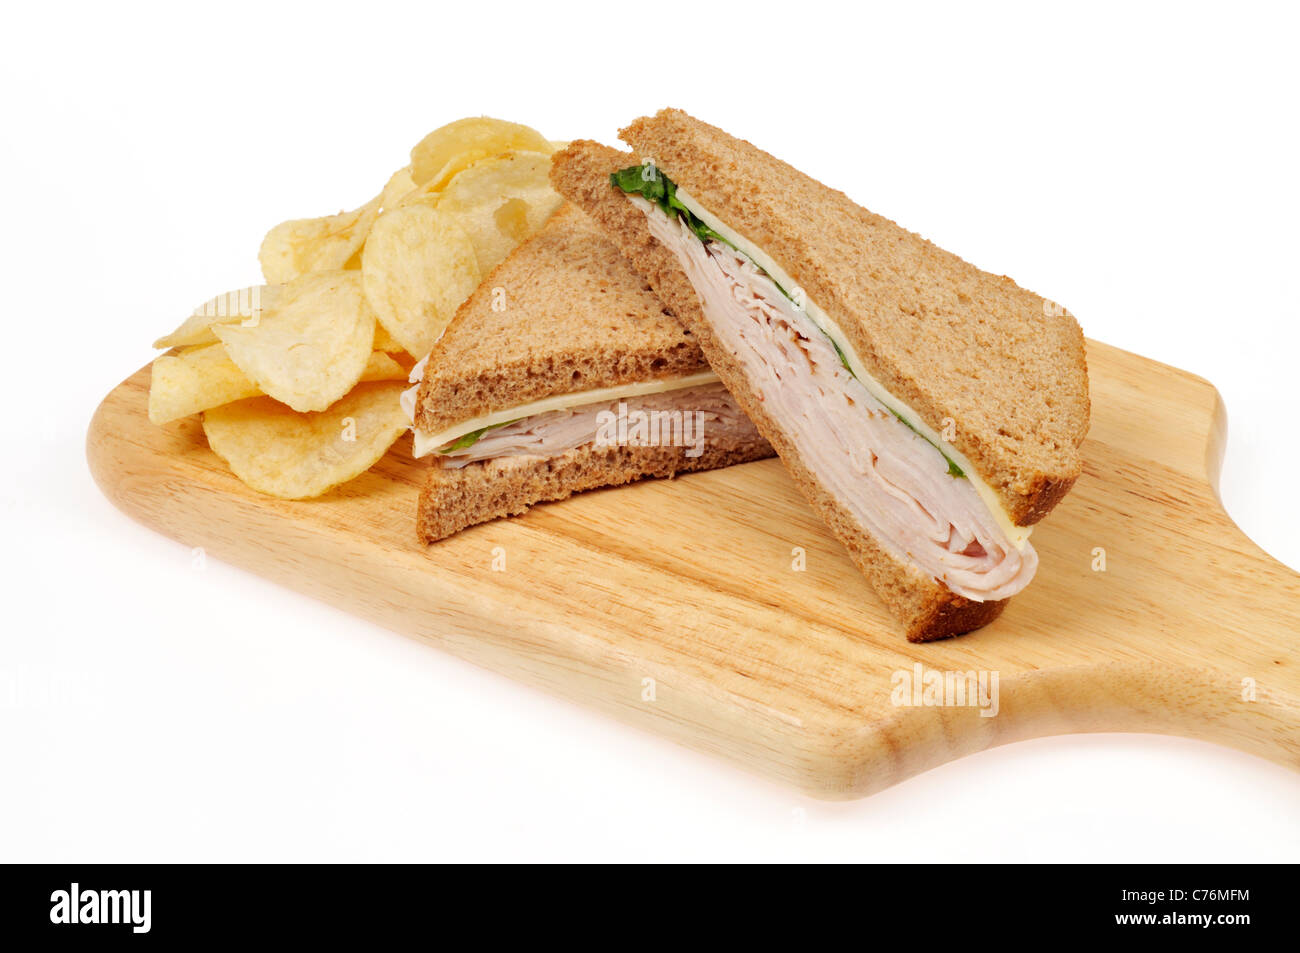 Turkey and cheese sandwich on whole meal bread cut in half  with crisps on wood cutting board on white background. Stock Photo